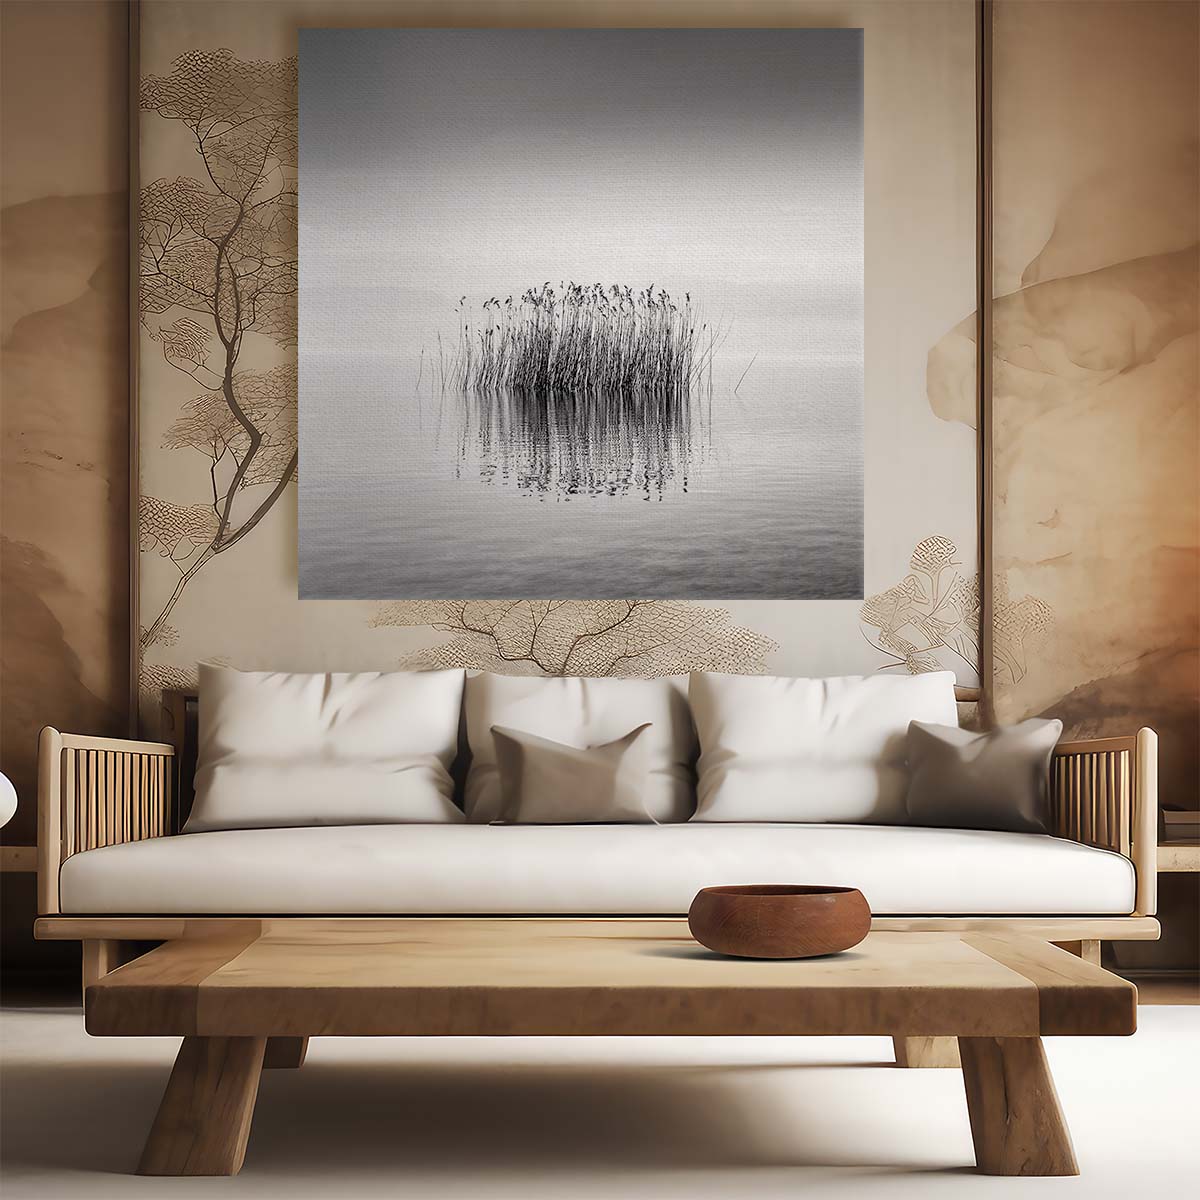 Foggy Lake Volvi, Greece Minimalist Landscape Photography Wall Art by Luxuriance Designs. Made in USA.